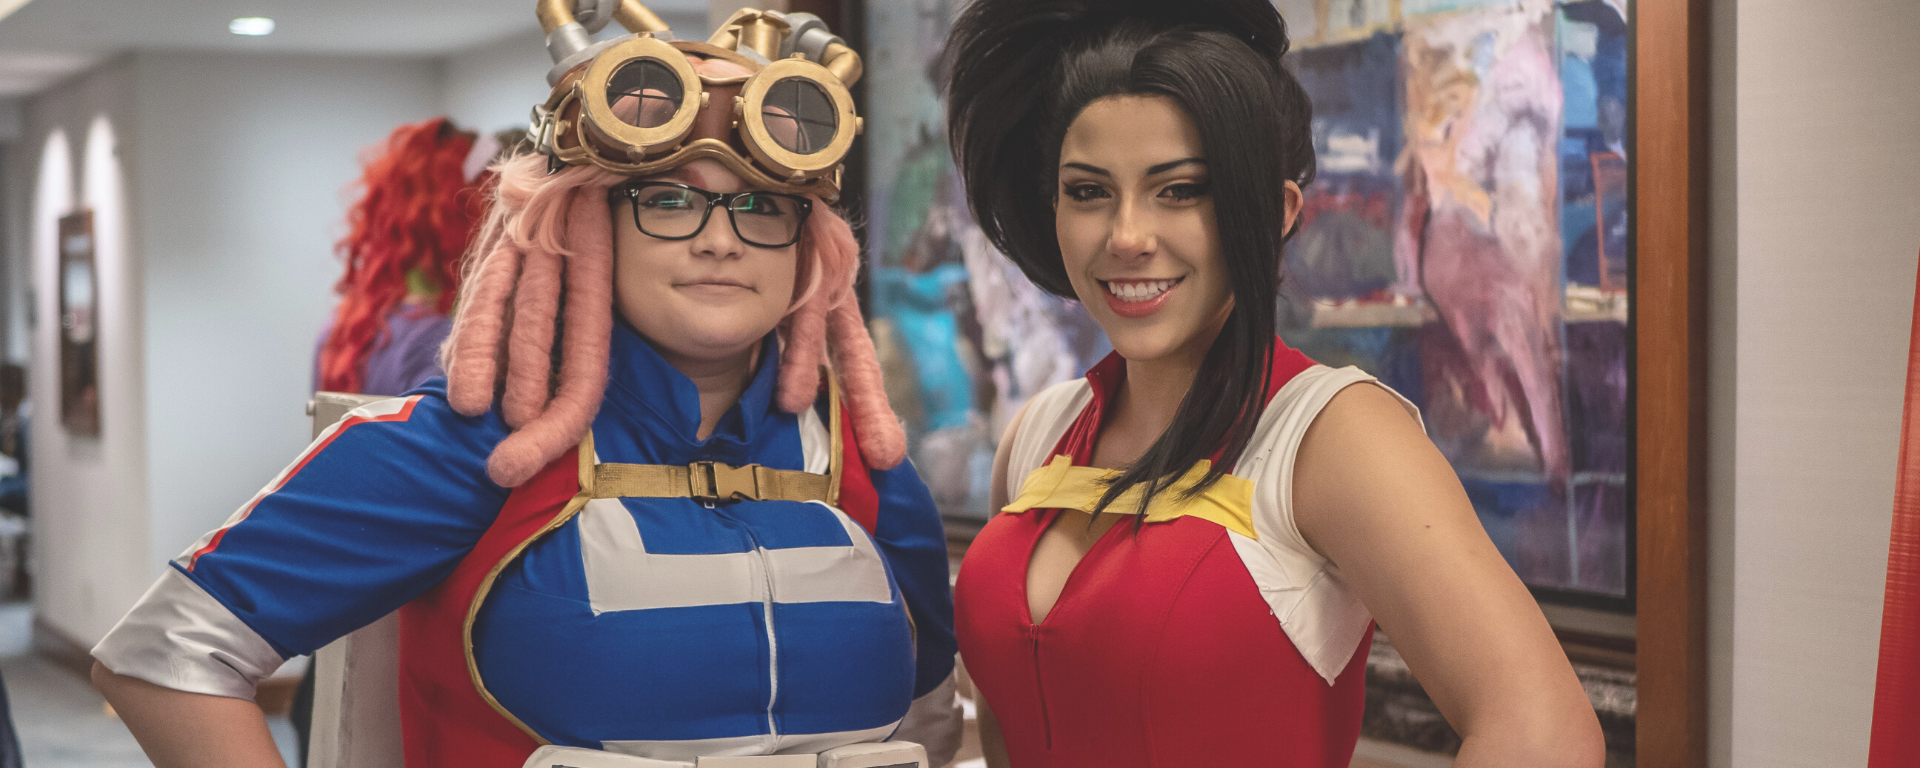 NomadicAmbitions and PurplePuppets cosplayers at Anime Dallas 2019